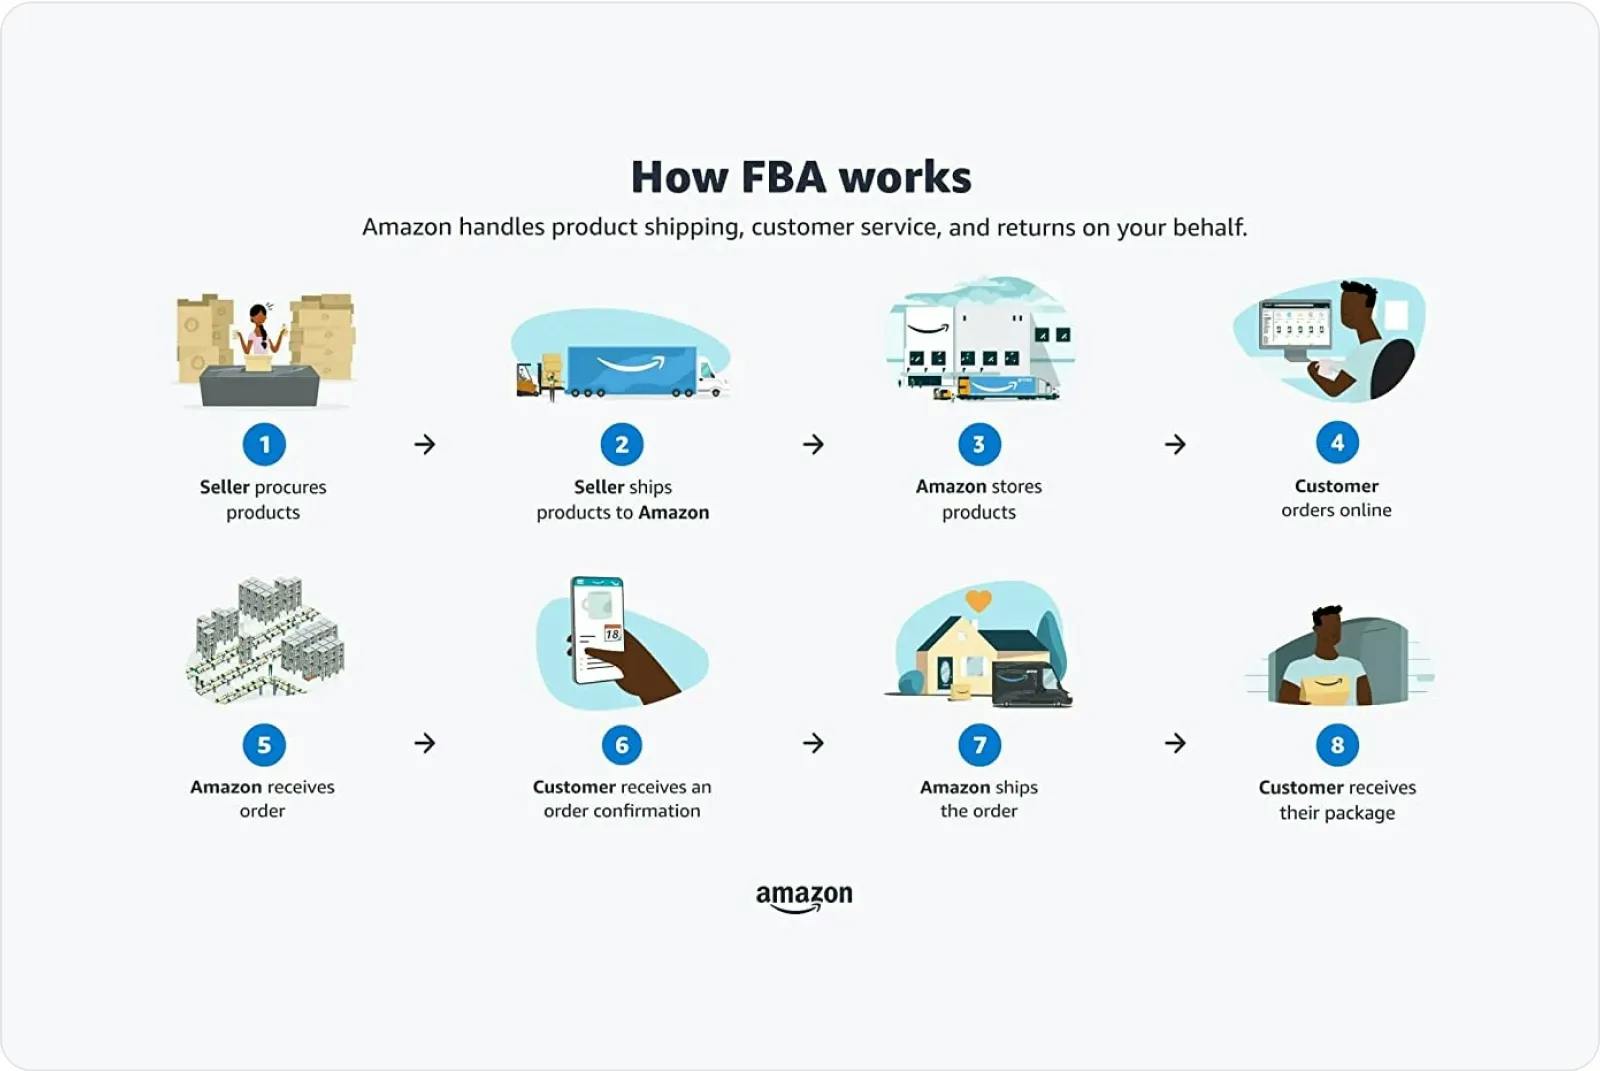 How FBA works infographic